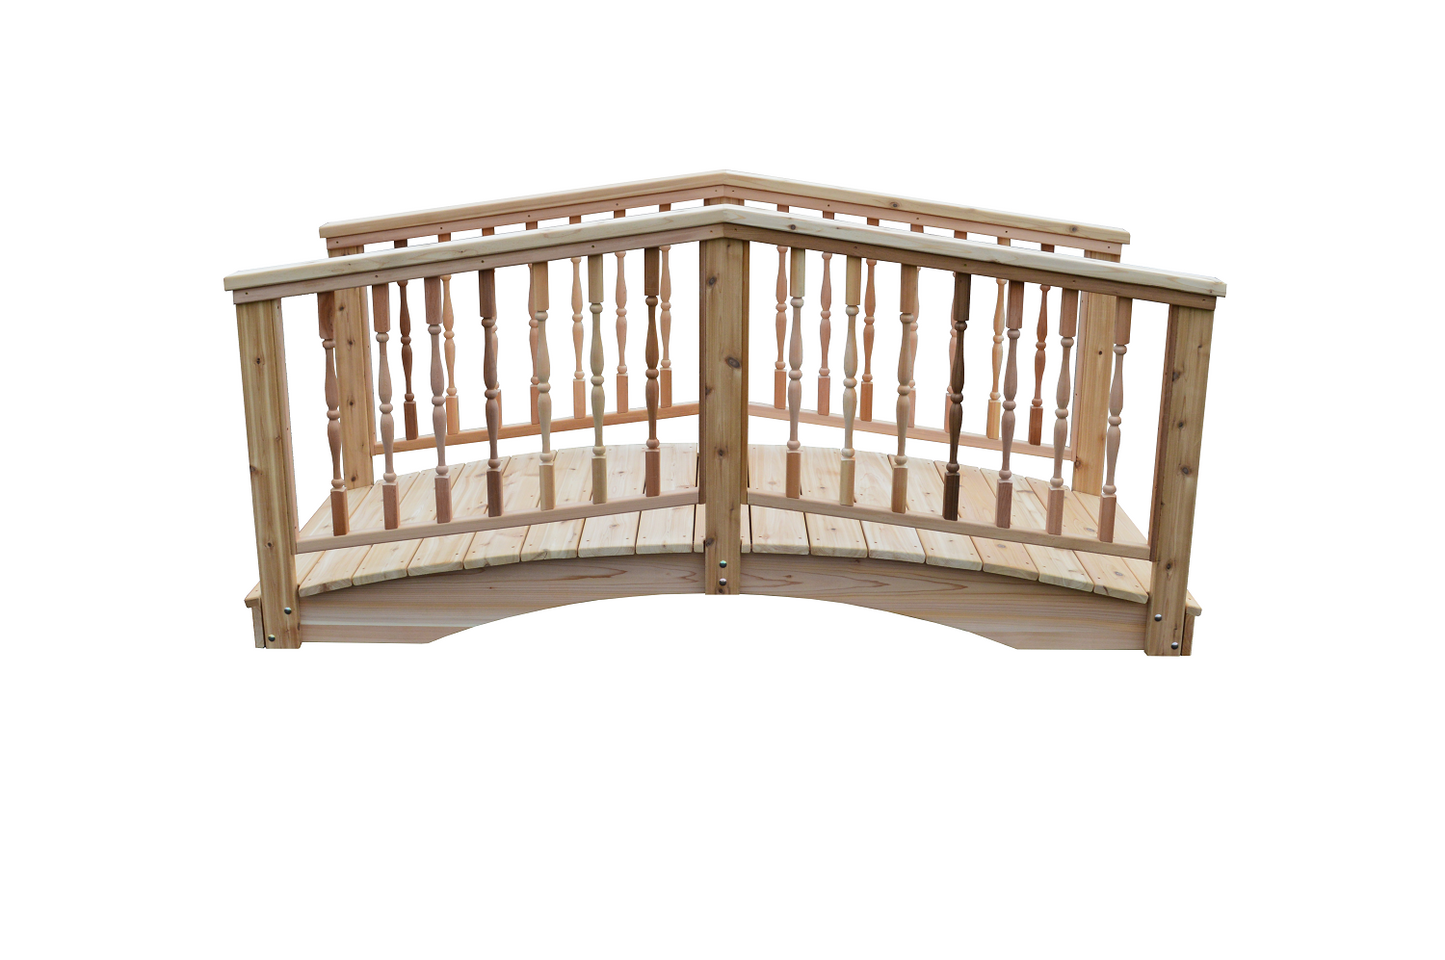 A&L Furniture Co. Western Red Cedar 3' x 10' Spindle Bridge - LEAD TIME TO SHIP 4 WEEKS OR LESS